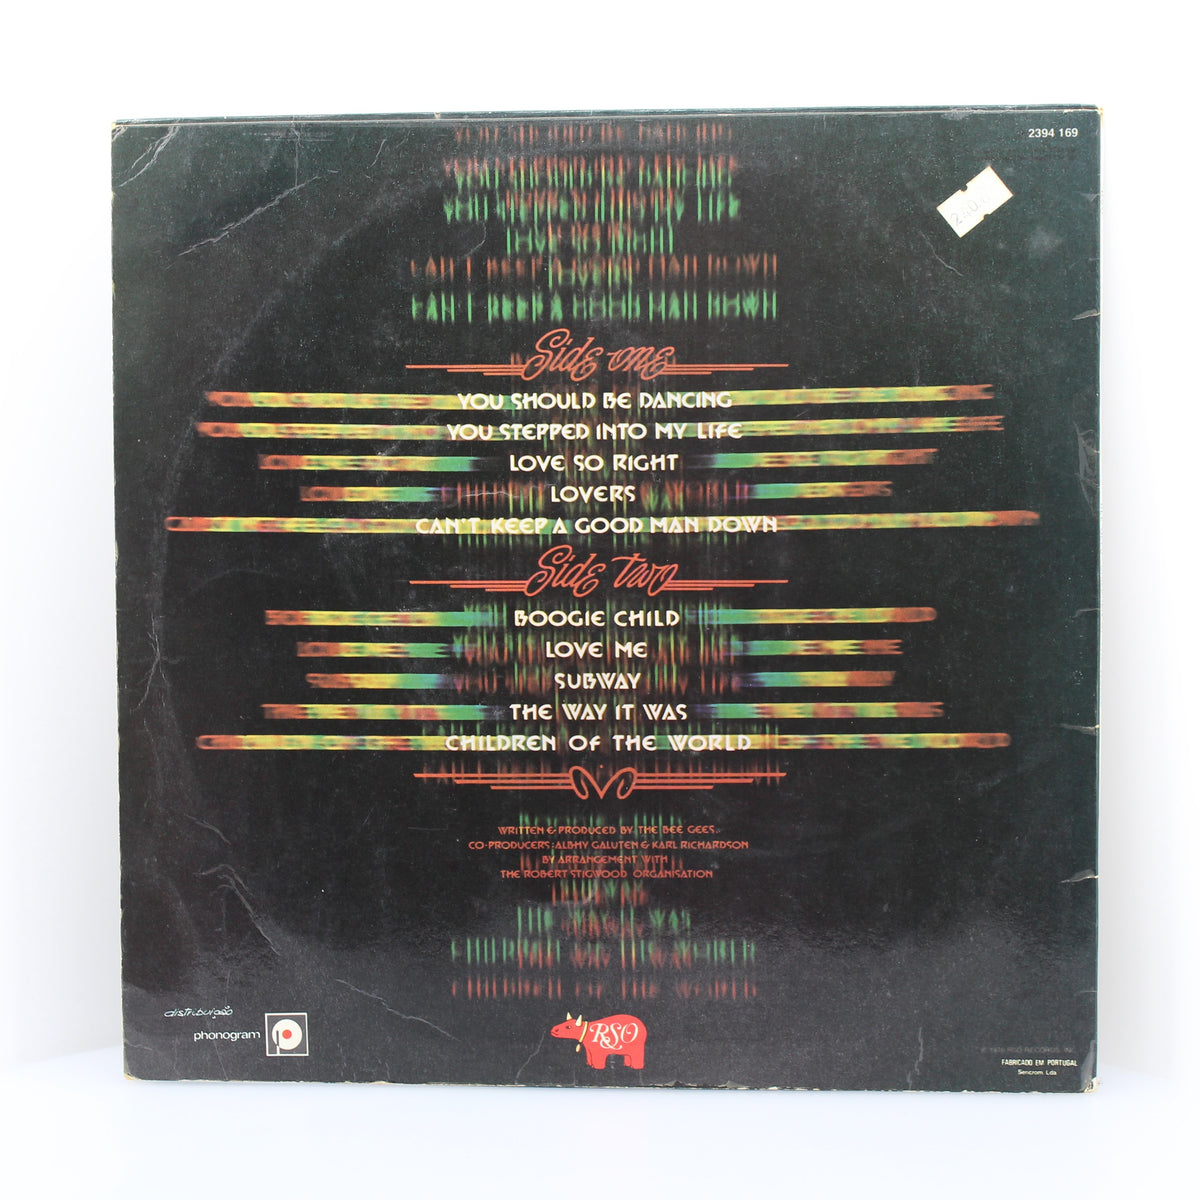 Bee Gees - Children Of The World, Vinyl, LP 33Rpm, Portugal 1976